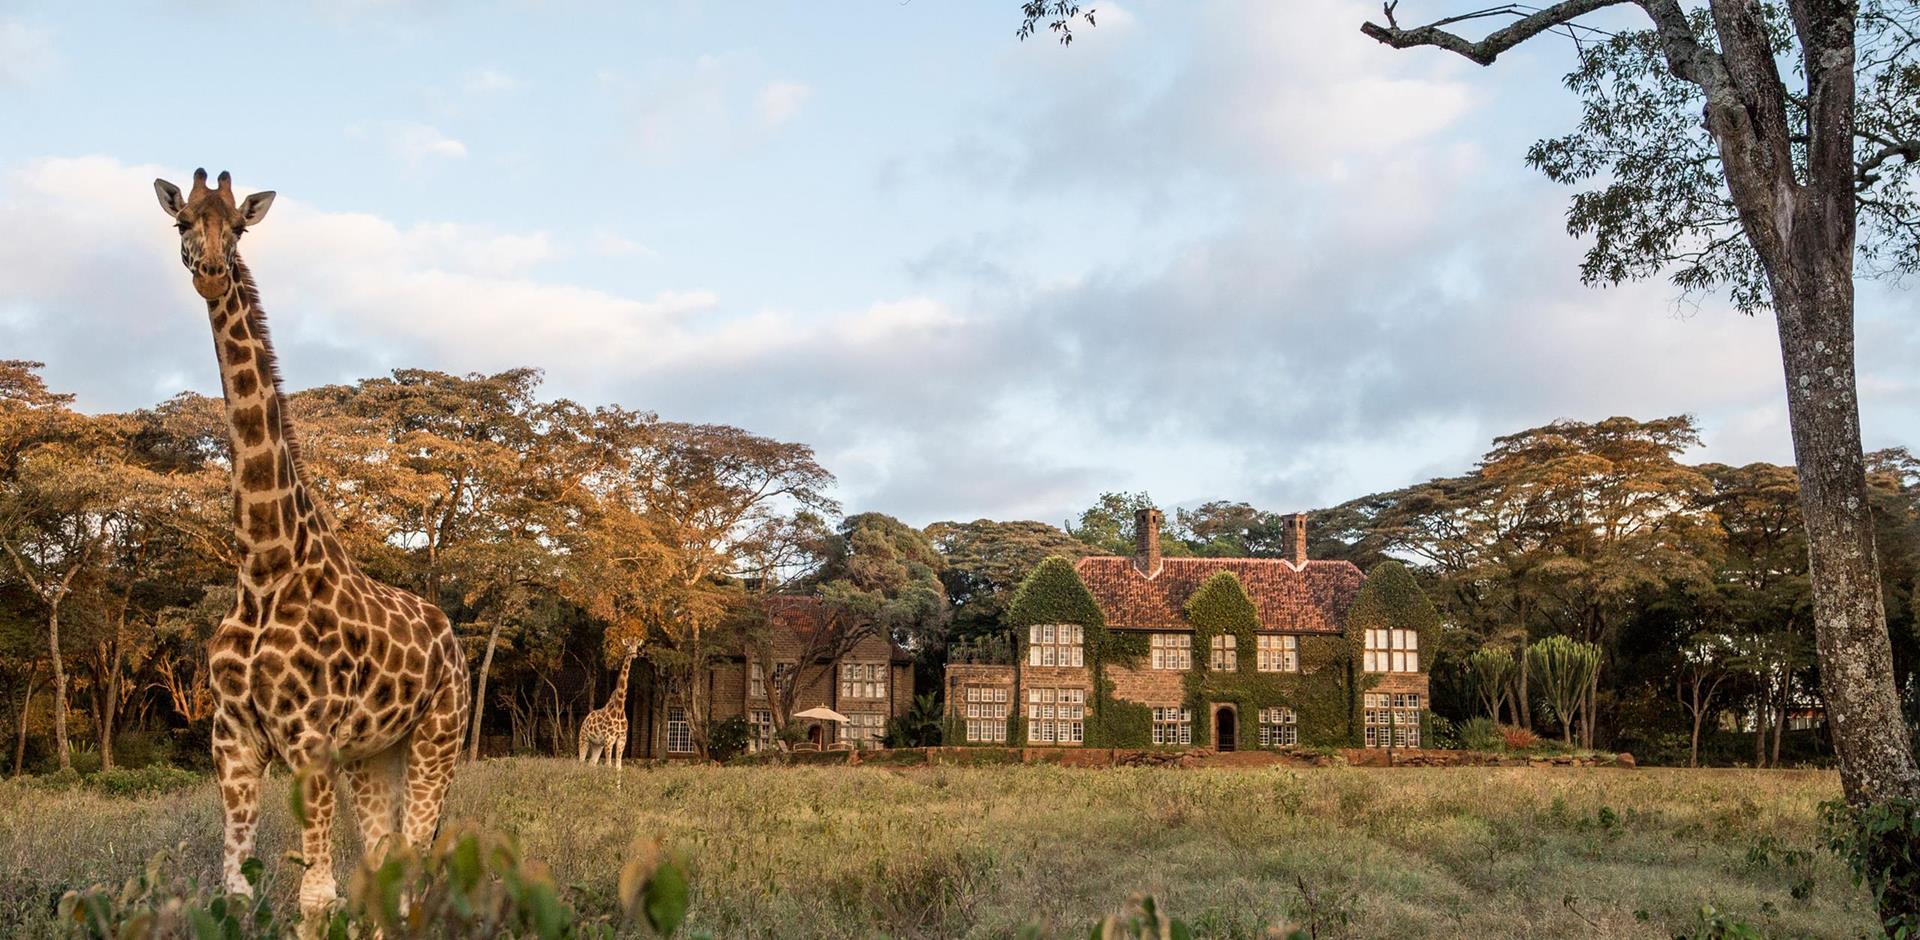 Stay at Giraffe Manor, Kenya with Abercrombie & Kent